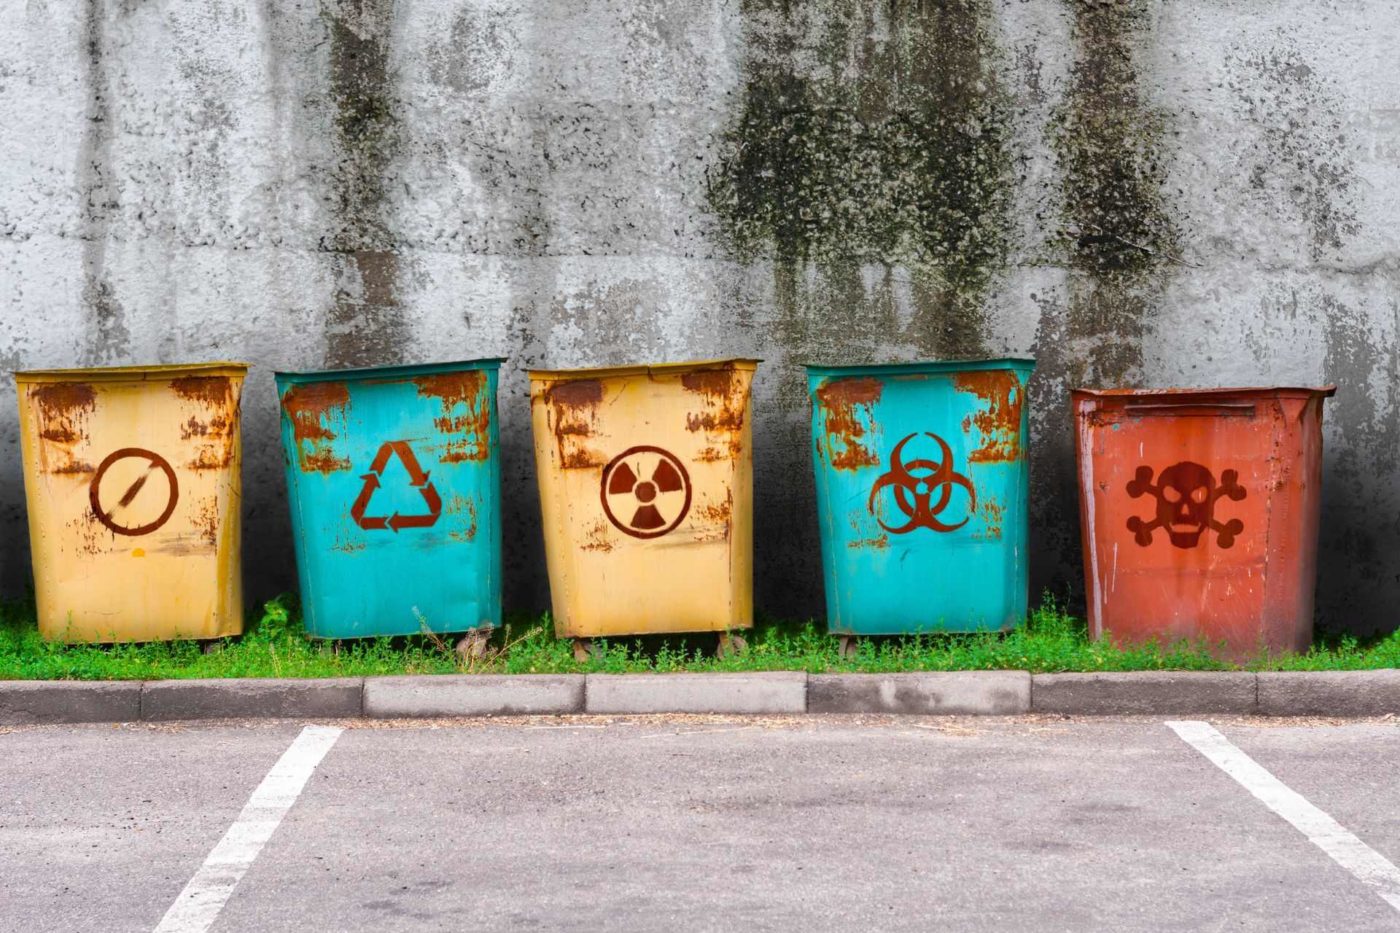 Bins for disposing of dangerous and other materials